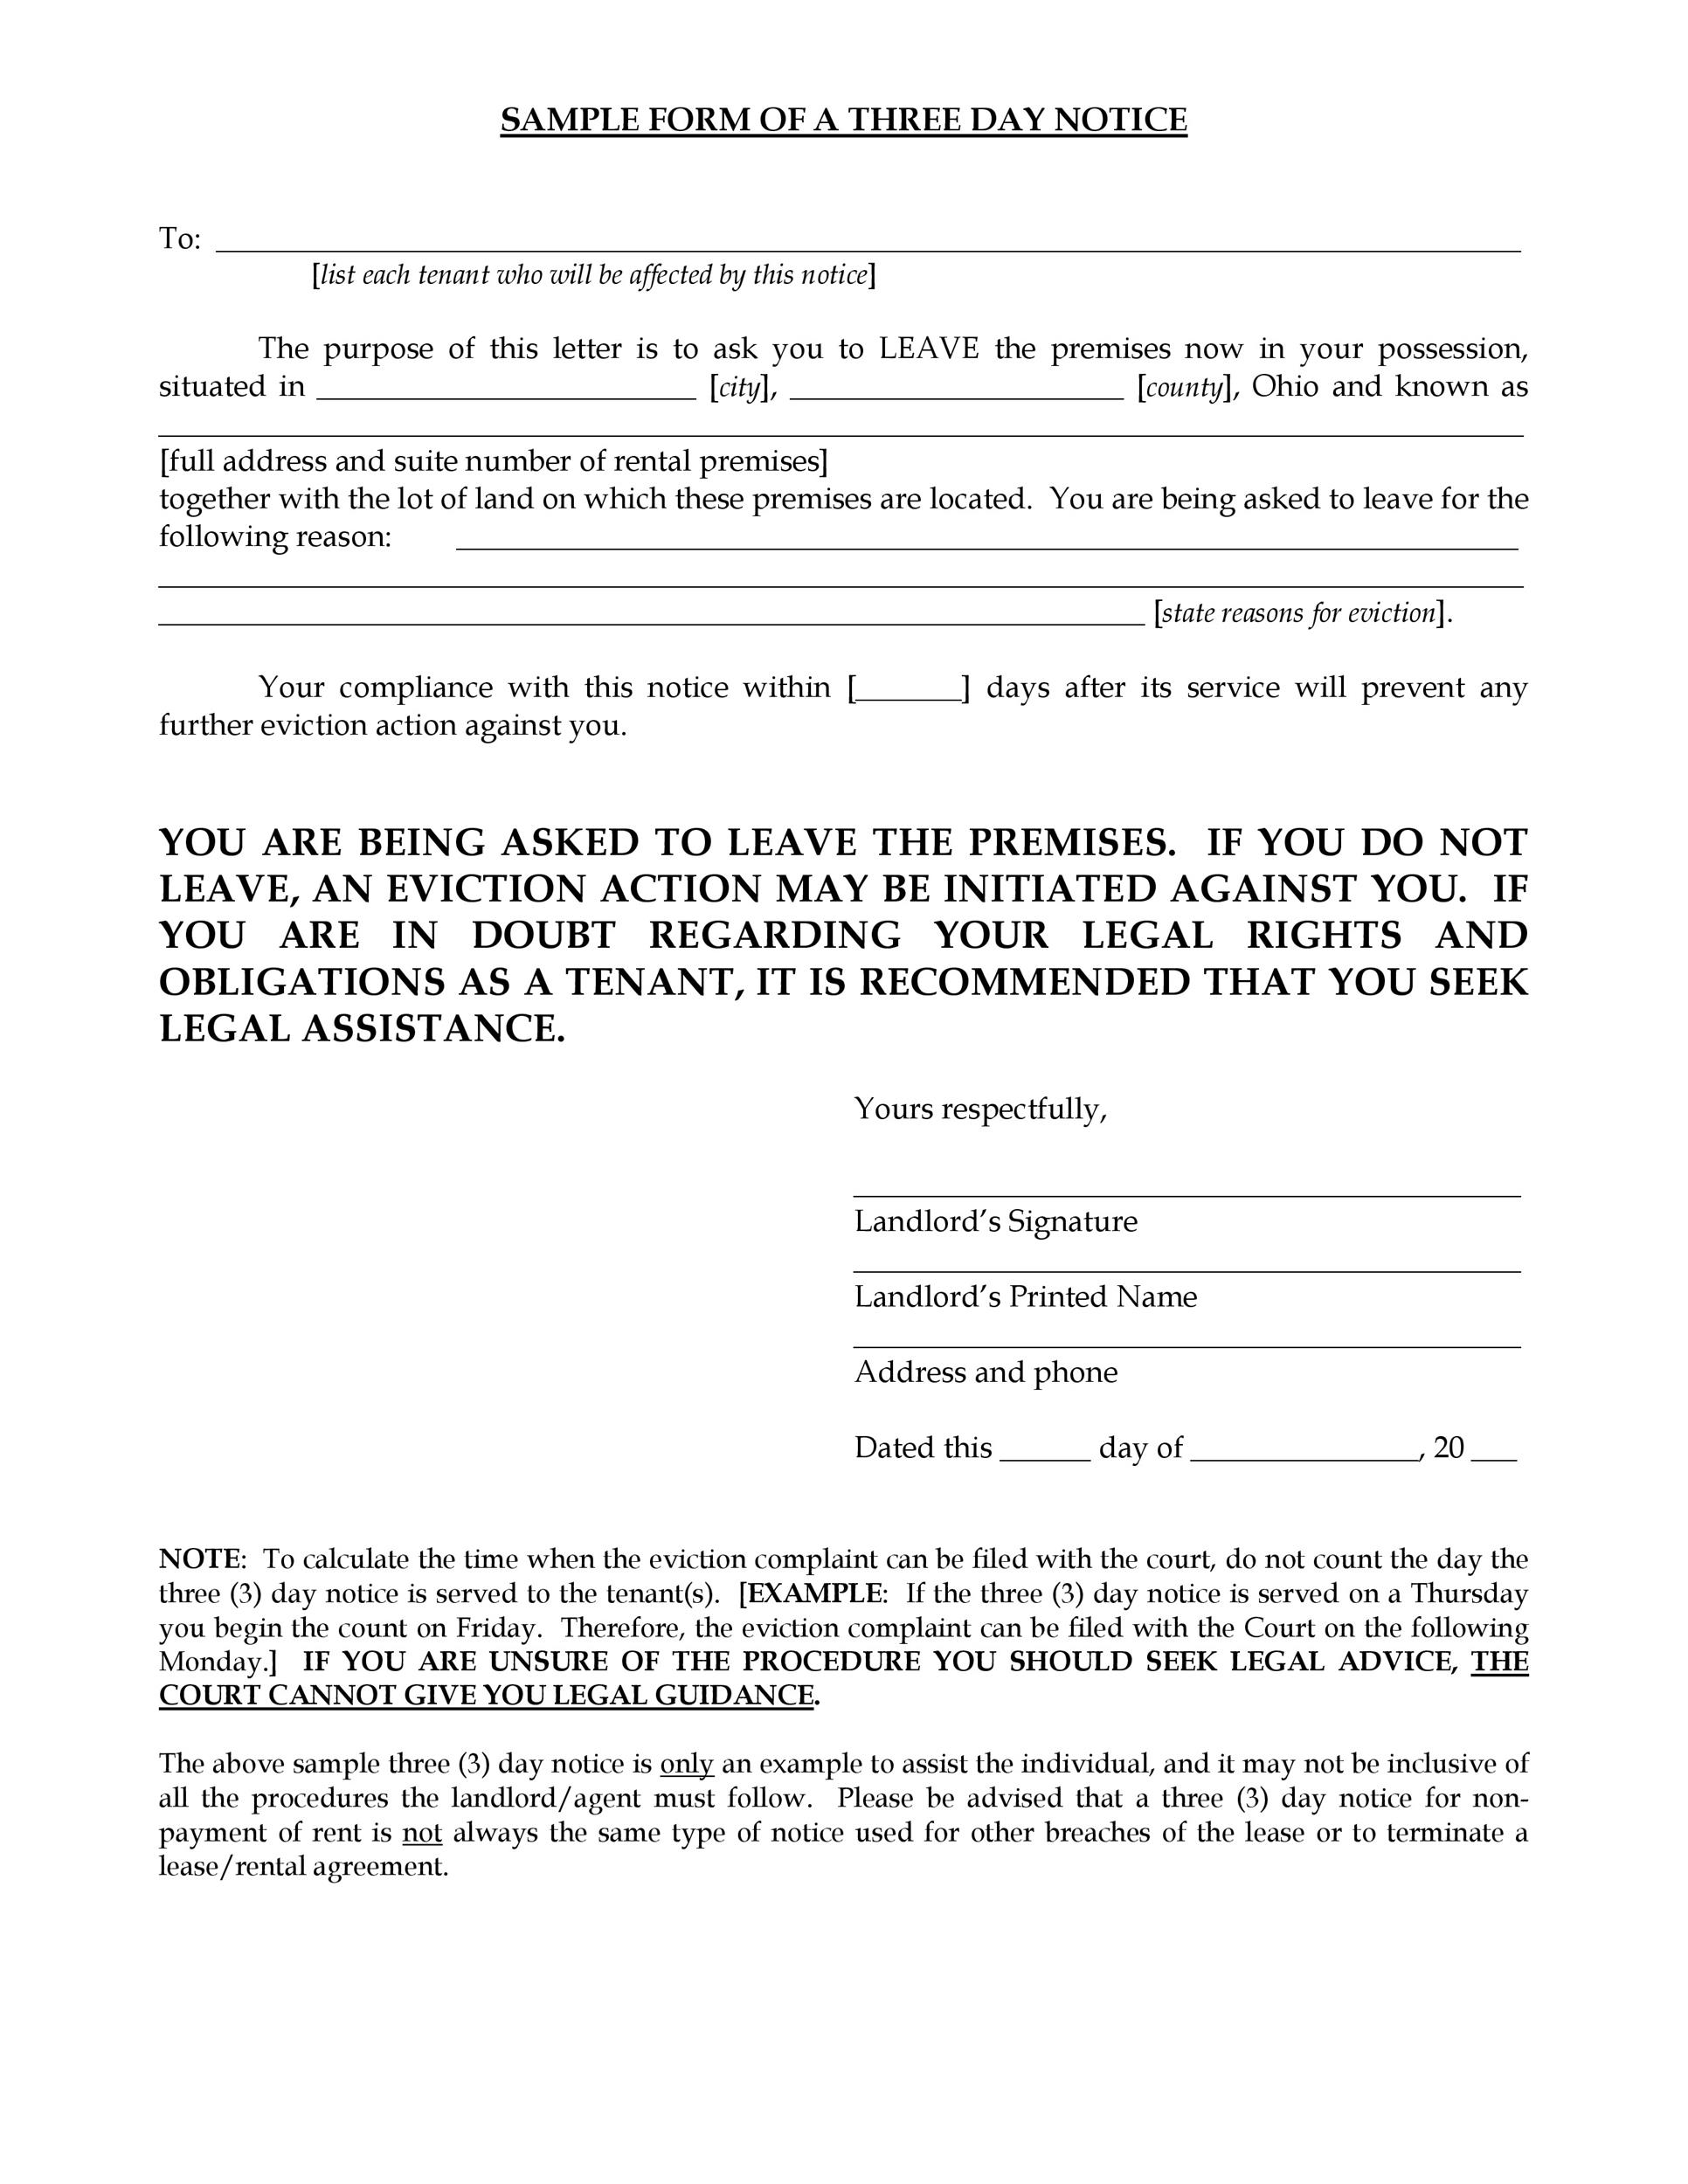 eviction petition format india